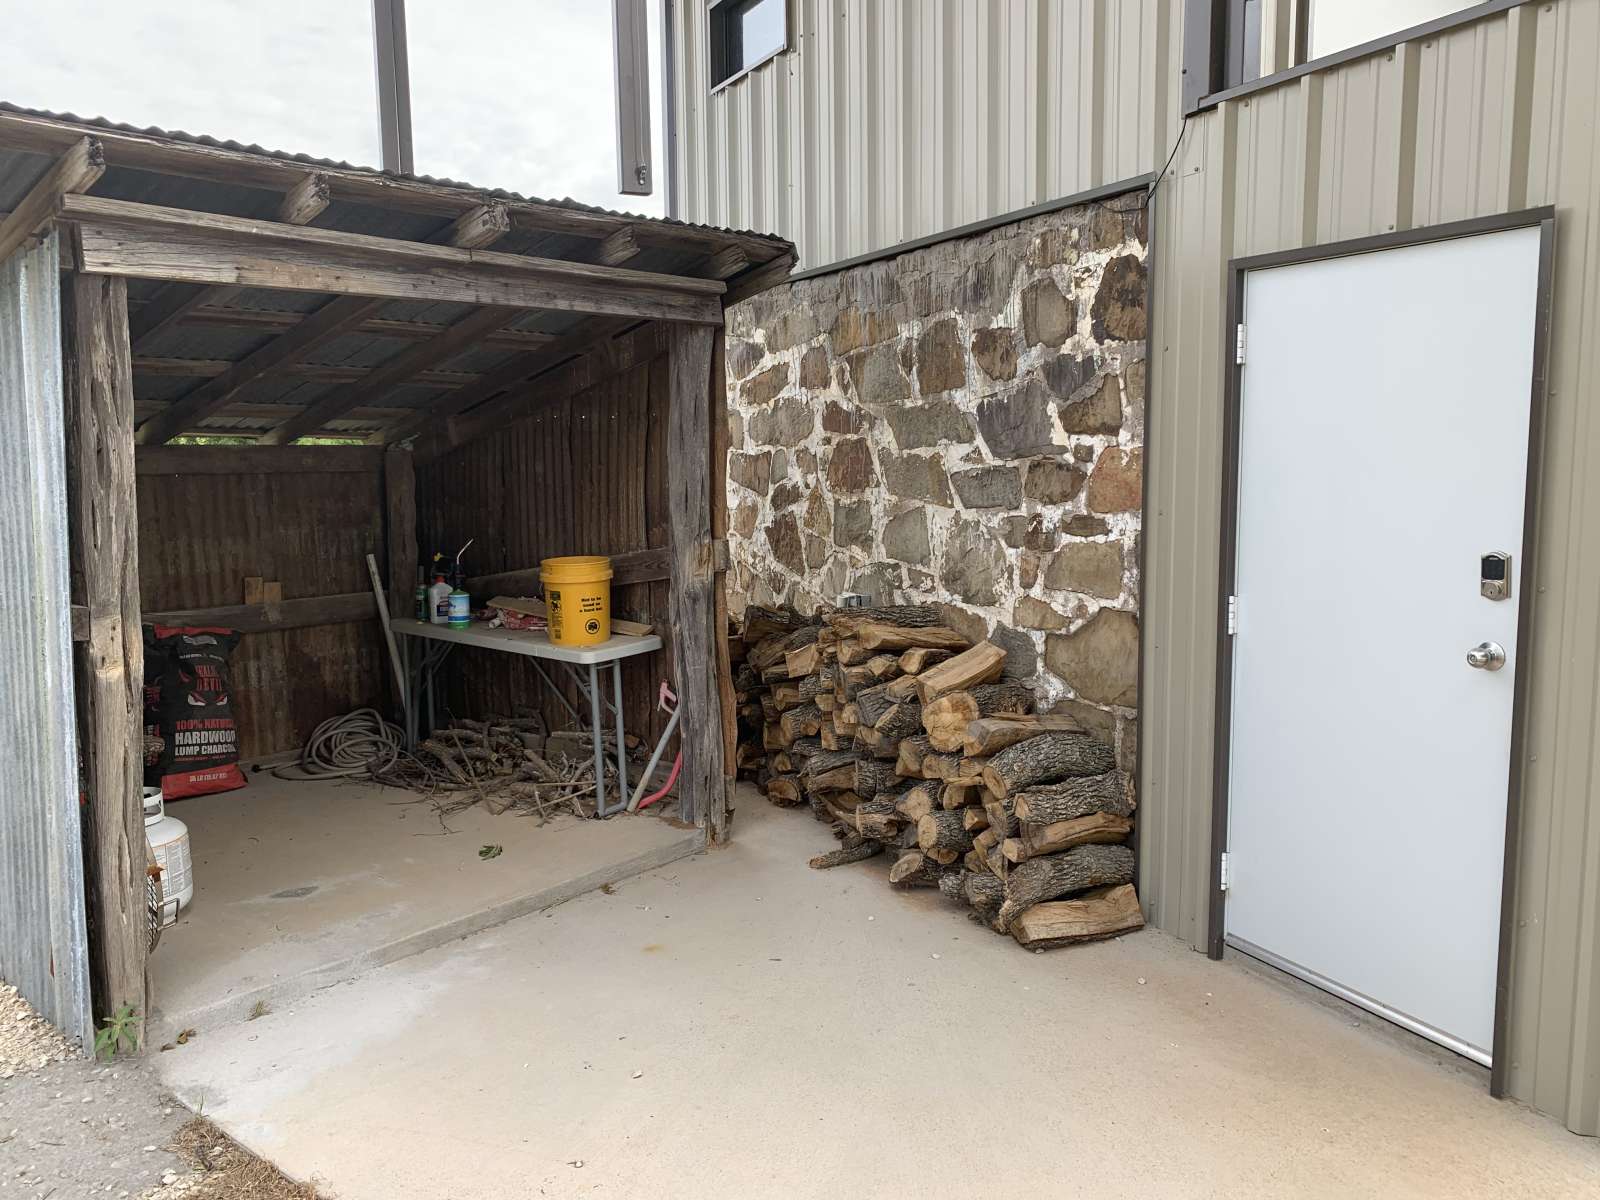 A view of the roost firewood and the storage area